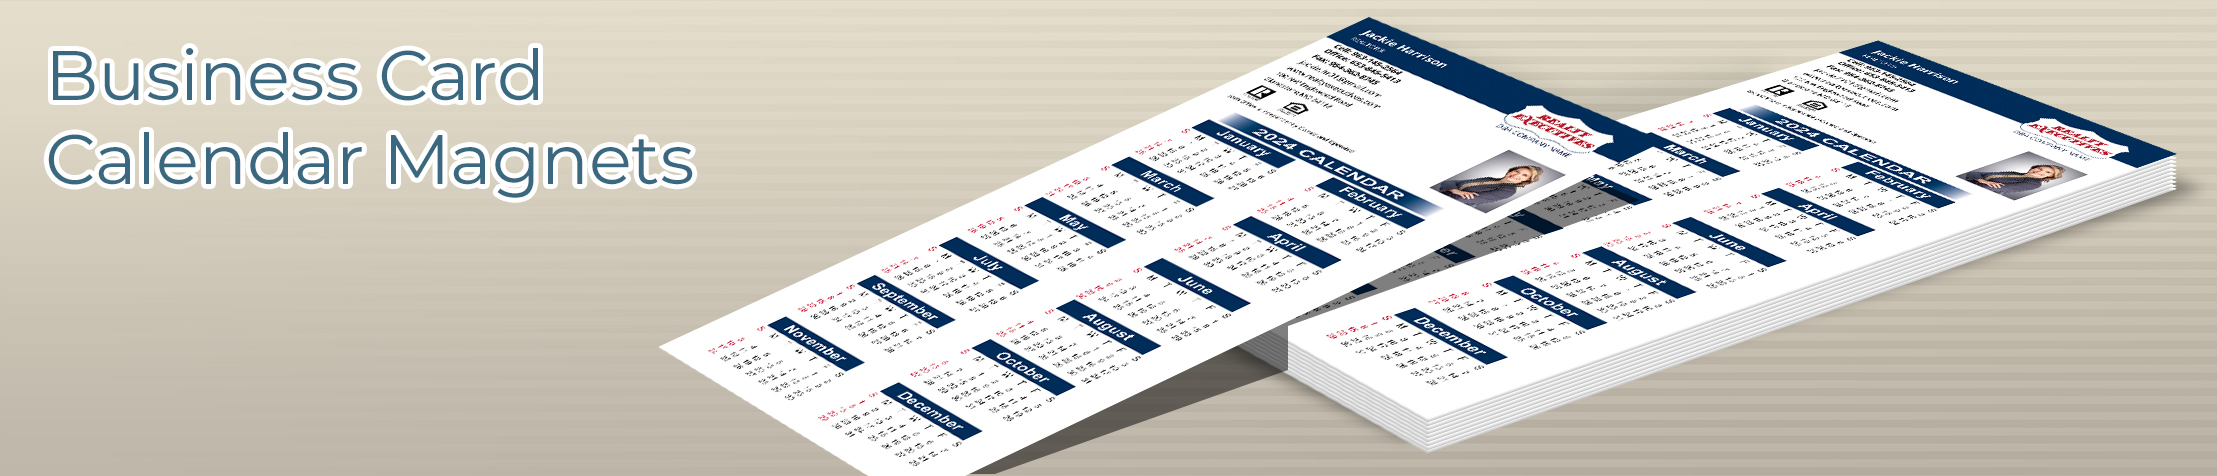 Realty Executives Real Estate Business Card Calendar Magnets - Realty Executives  2019 calendars with photo and contact info | BestPrintBuy.com